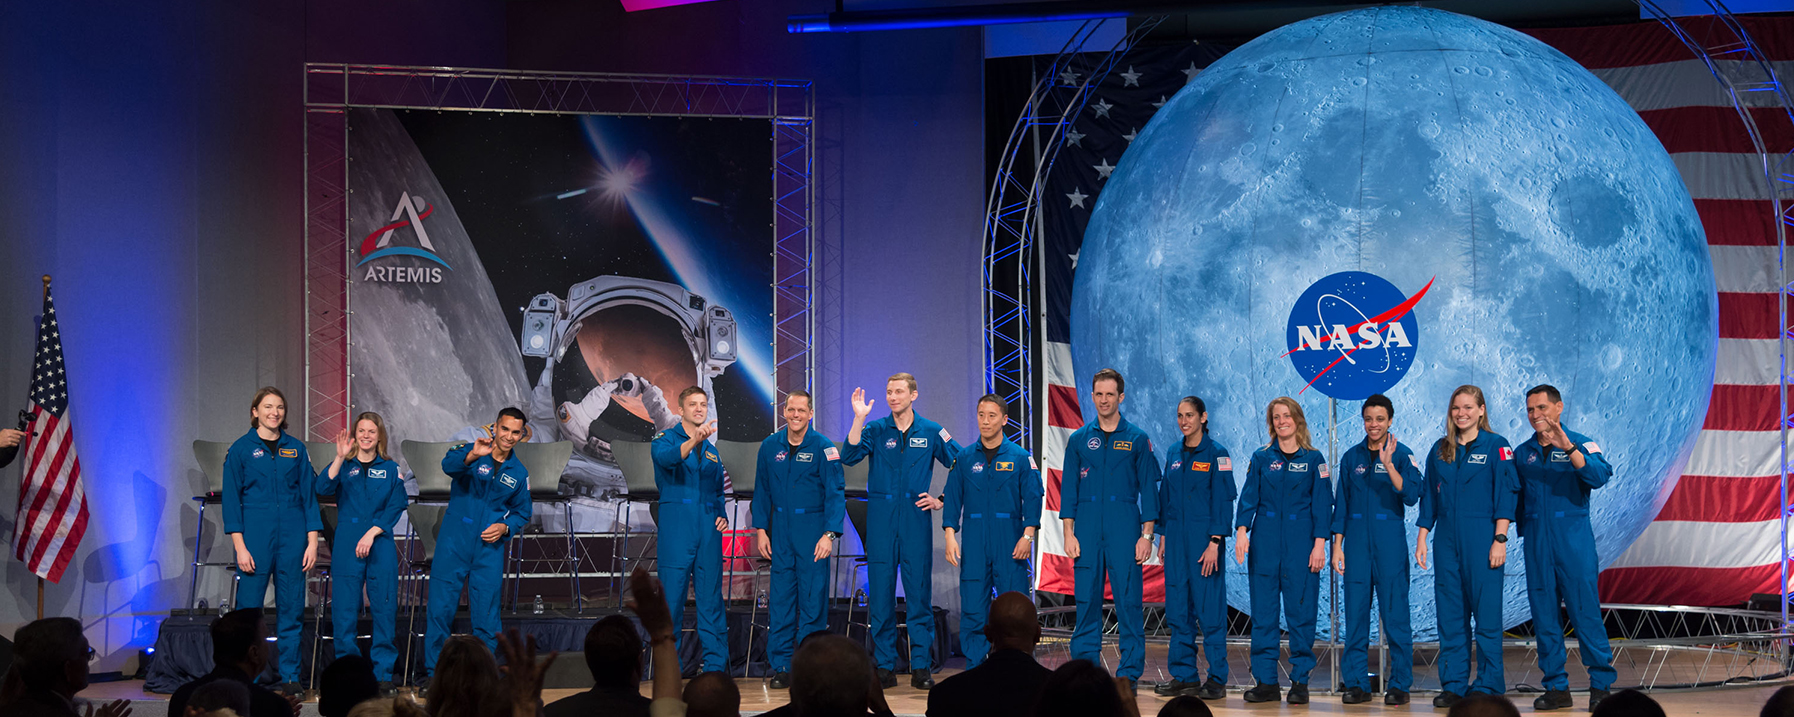 Astronauts on a stage